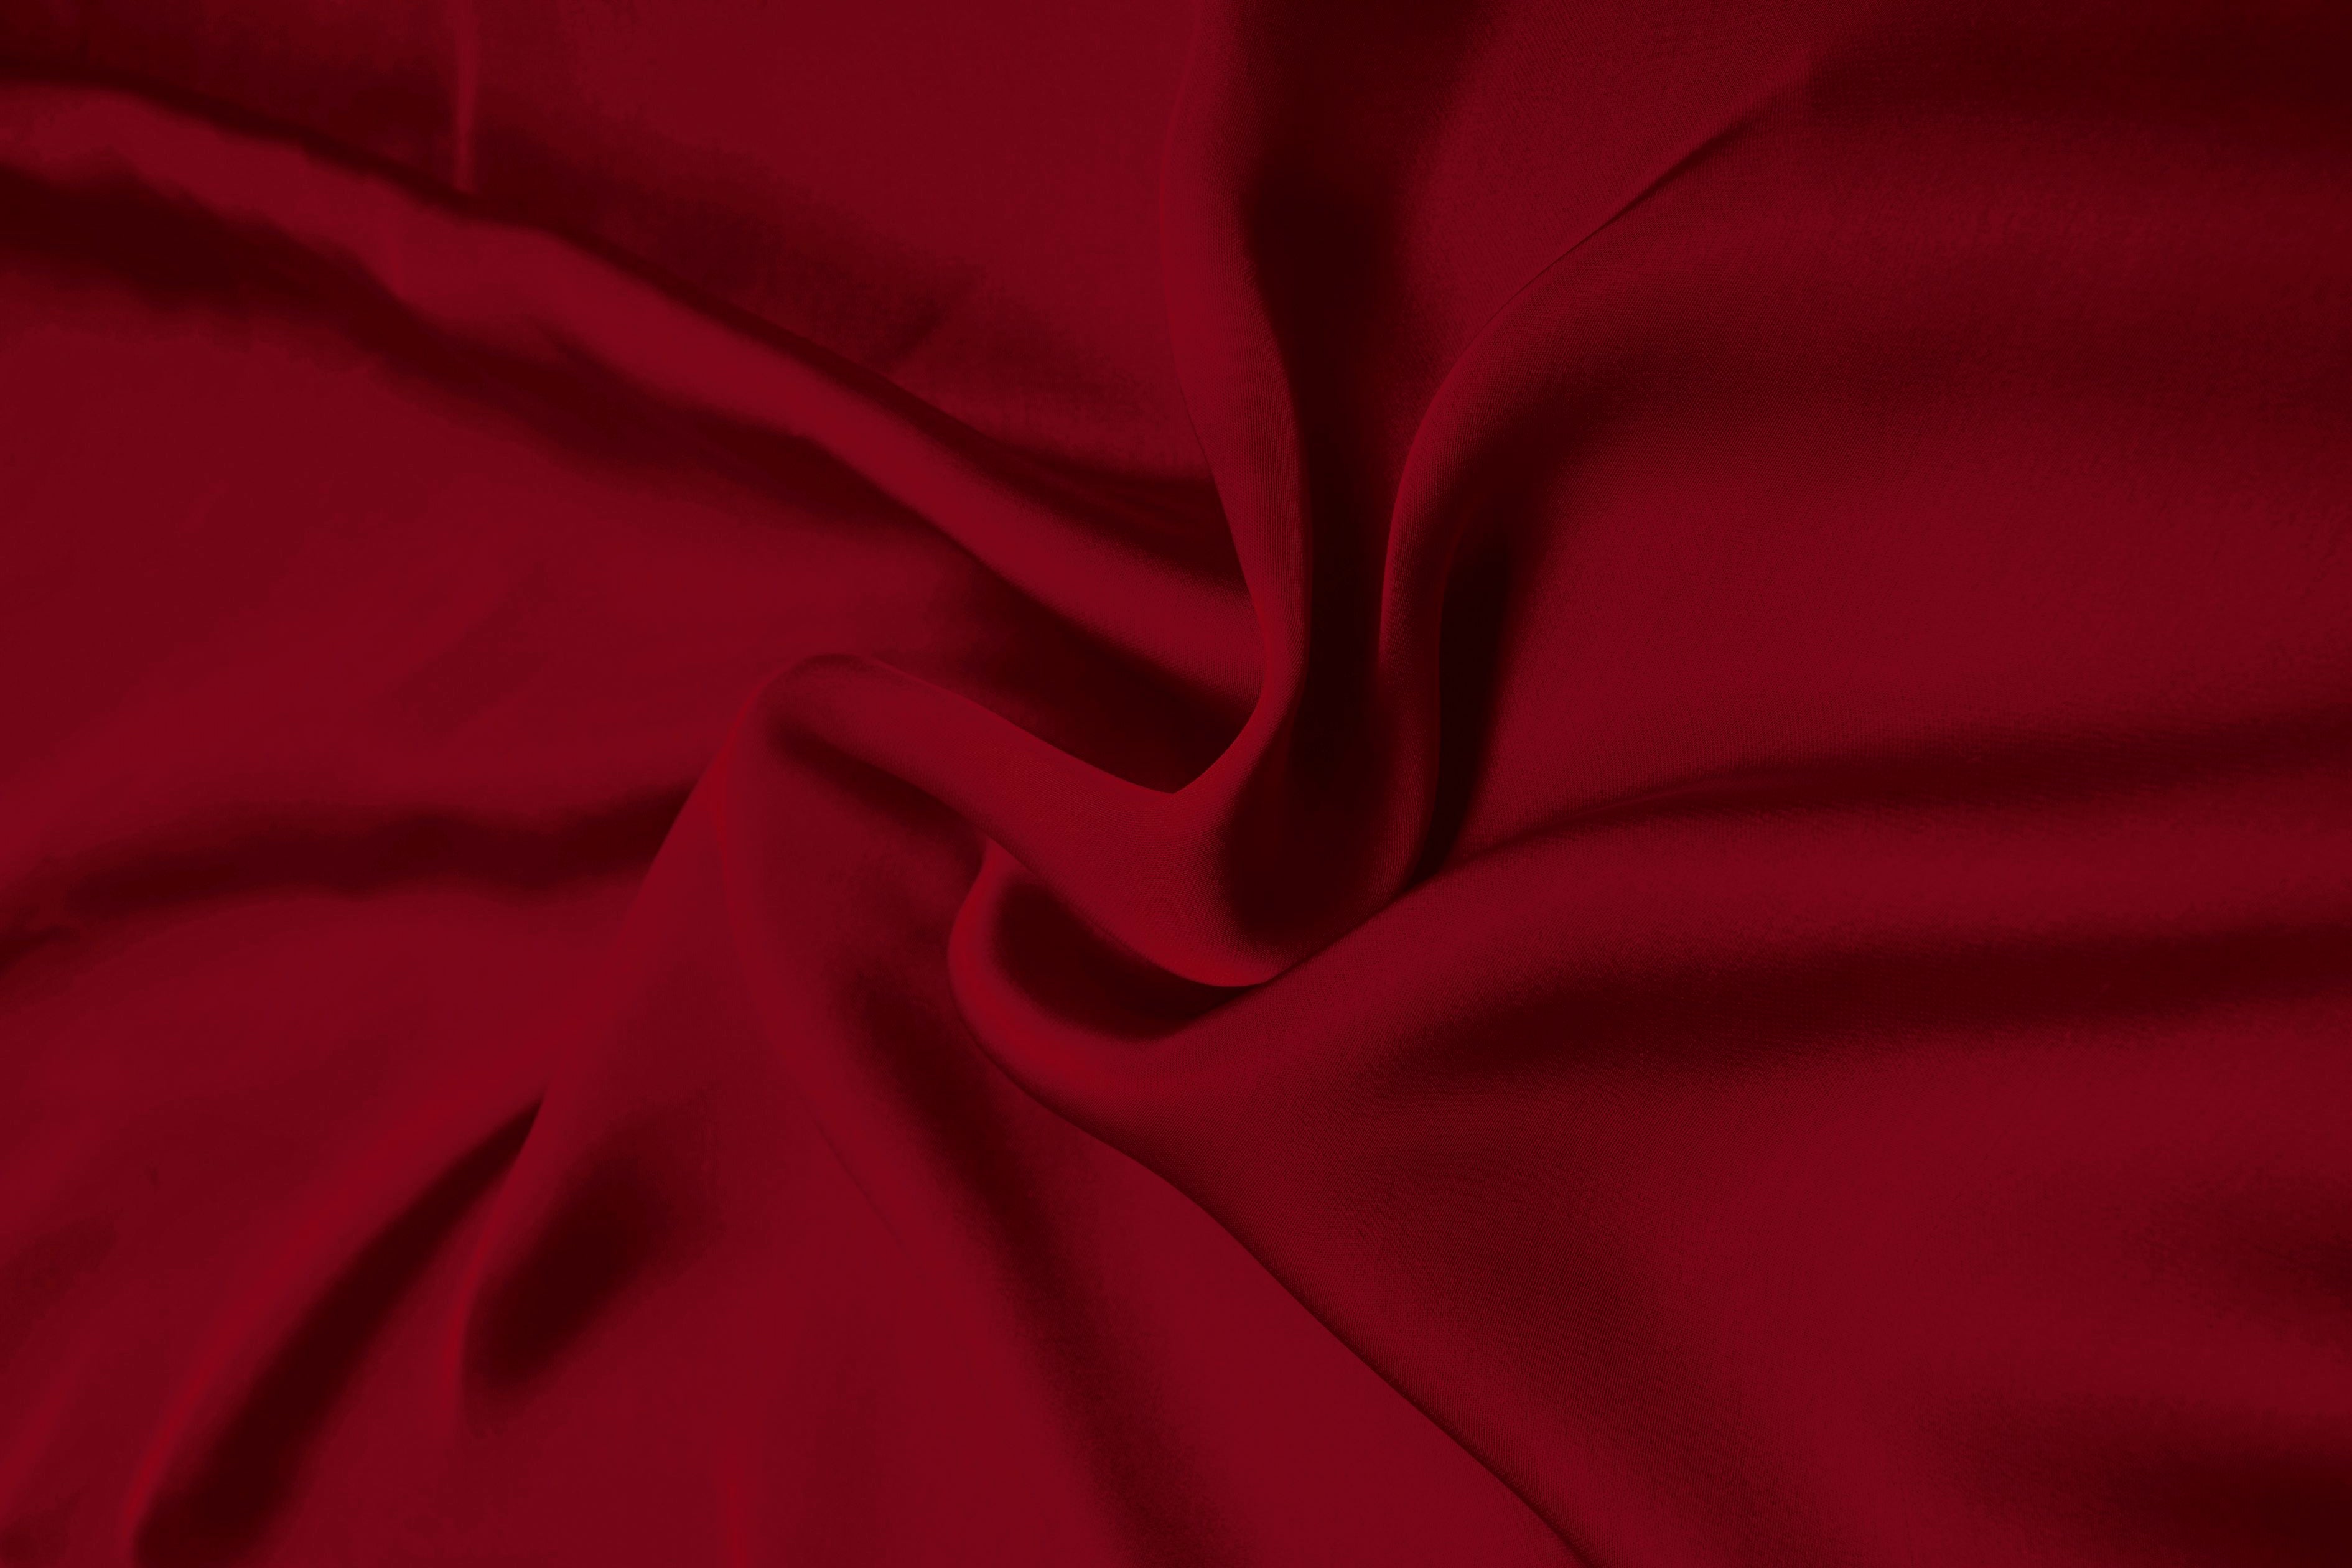 Cationic Maroon Plain Dyed Satin Georgette Fabric